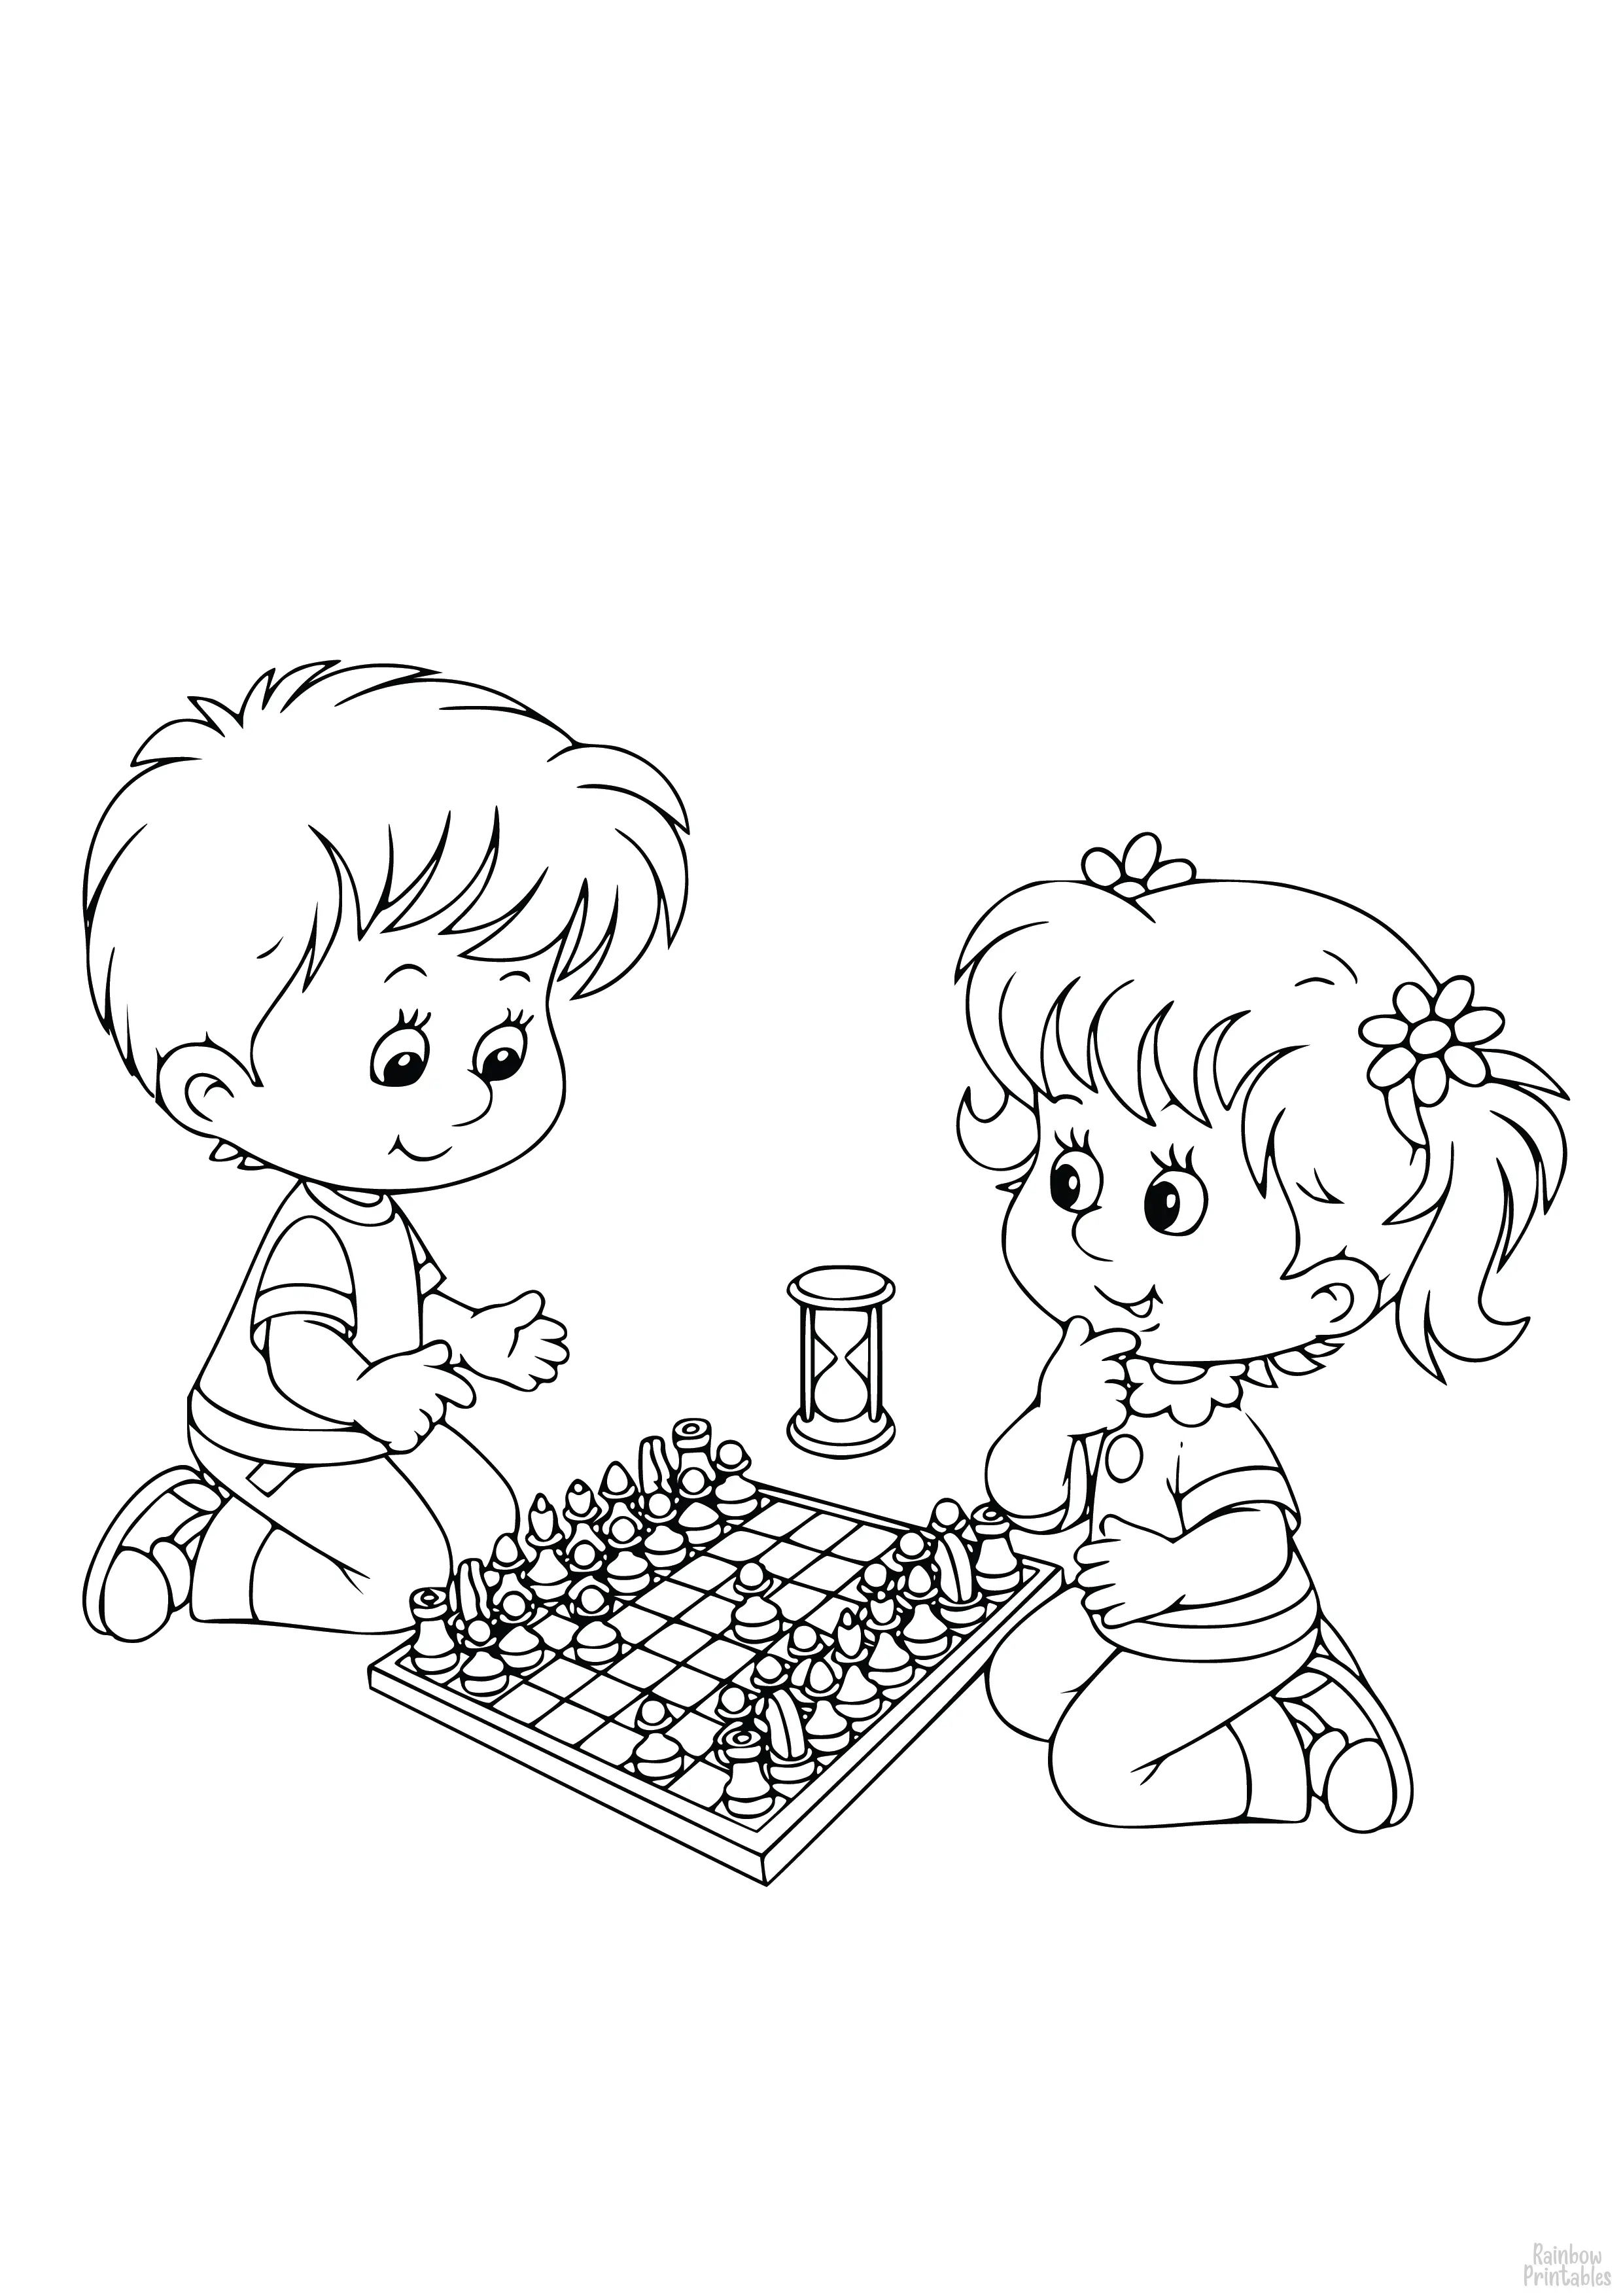 Kids Playing Chess People Free Clipart Coloring Pages for Kids Adults Art Activities Line Art-03